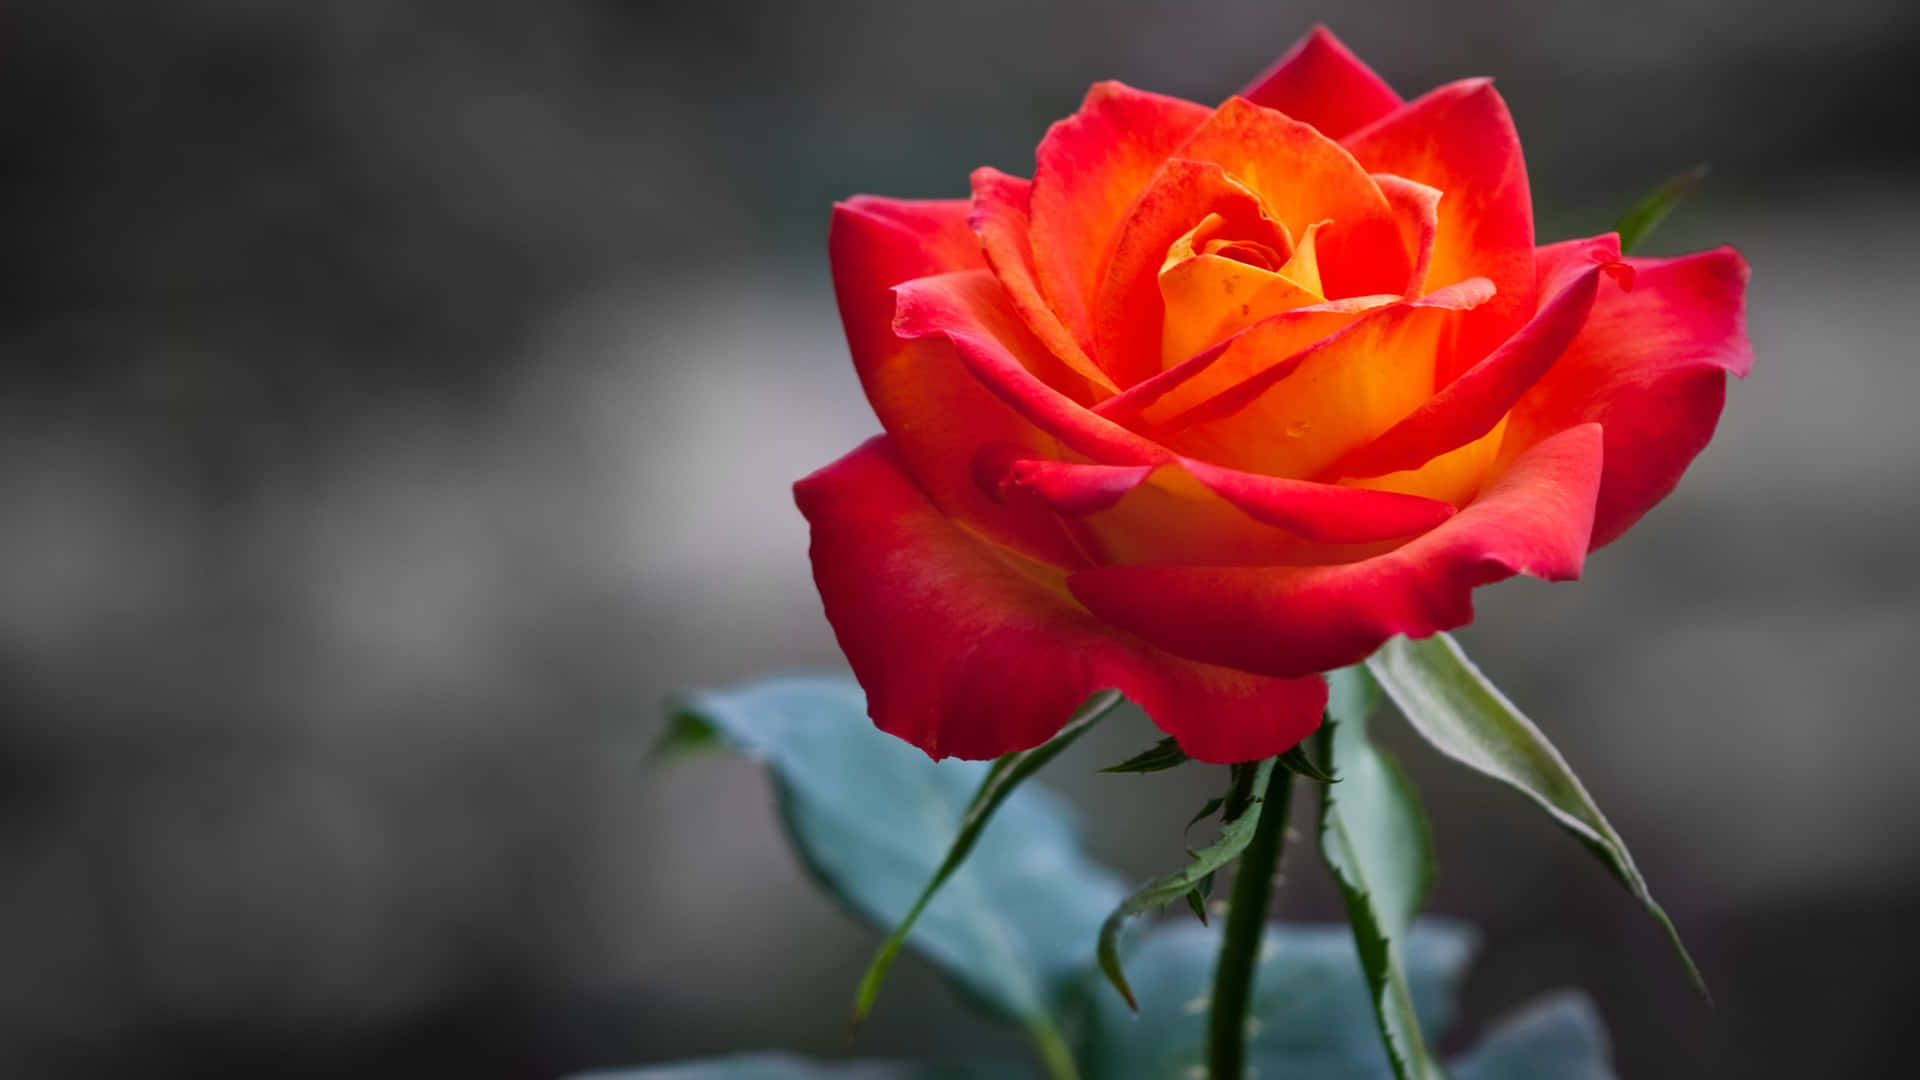 A Beautiful, Vibrant Red Rose Stands Out Against A Shadowy Background.